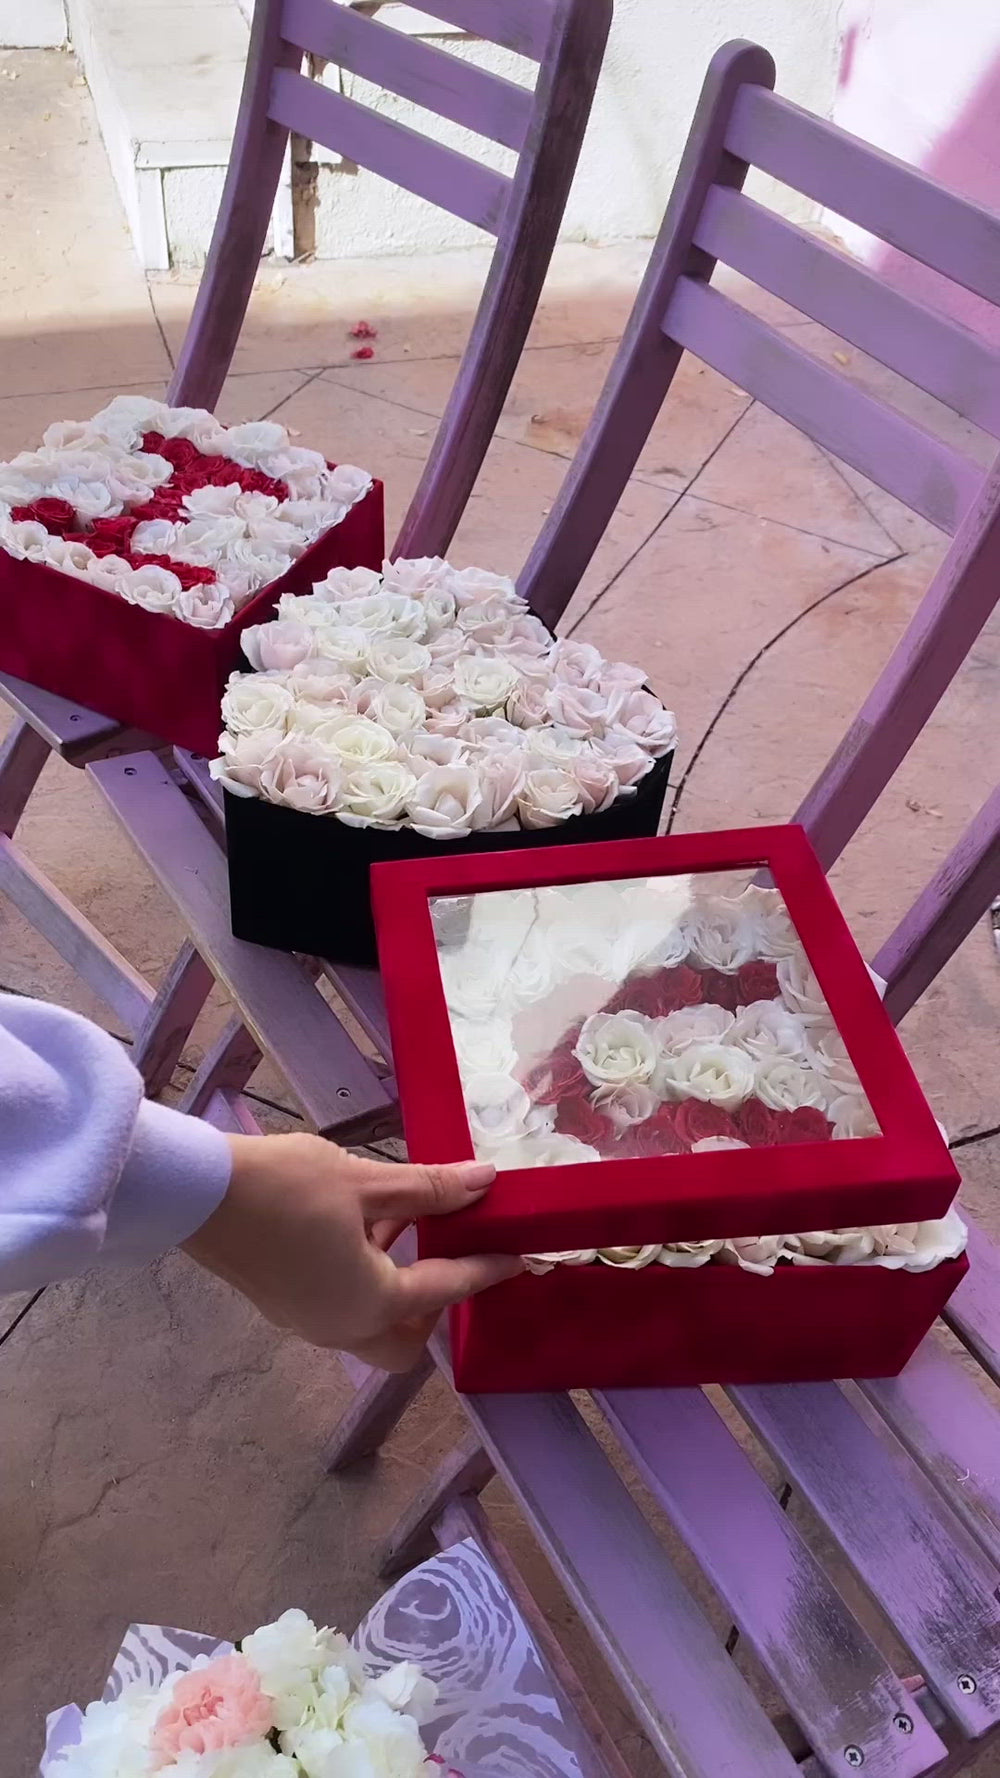 “I LOVE YOU”  - 3 boxes with red and white roses